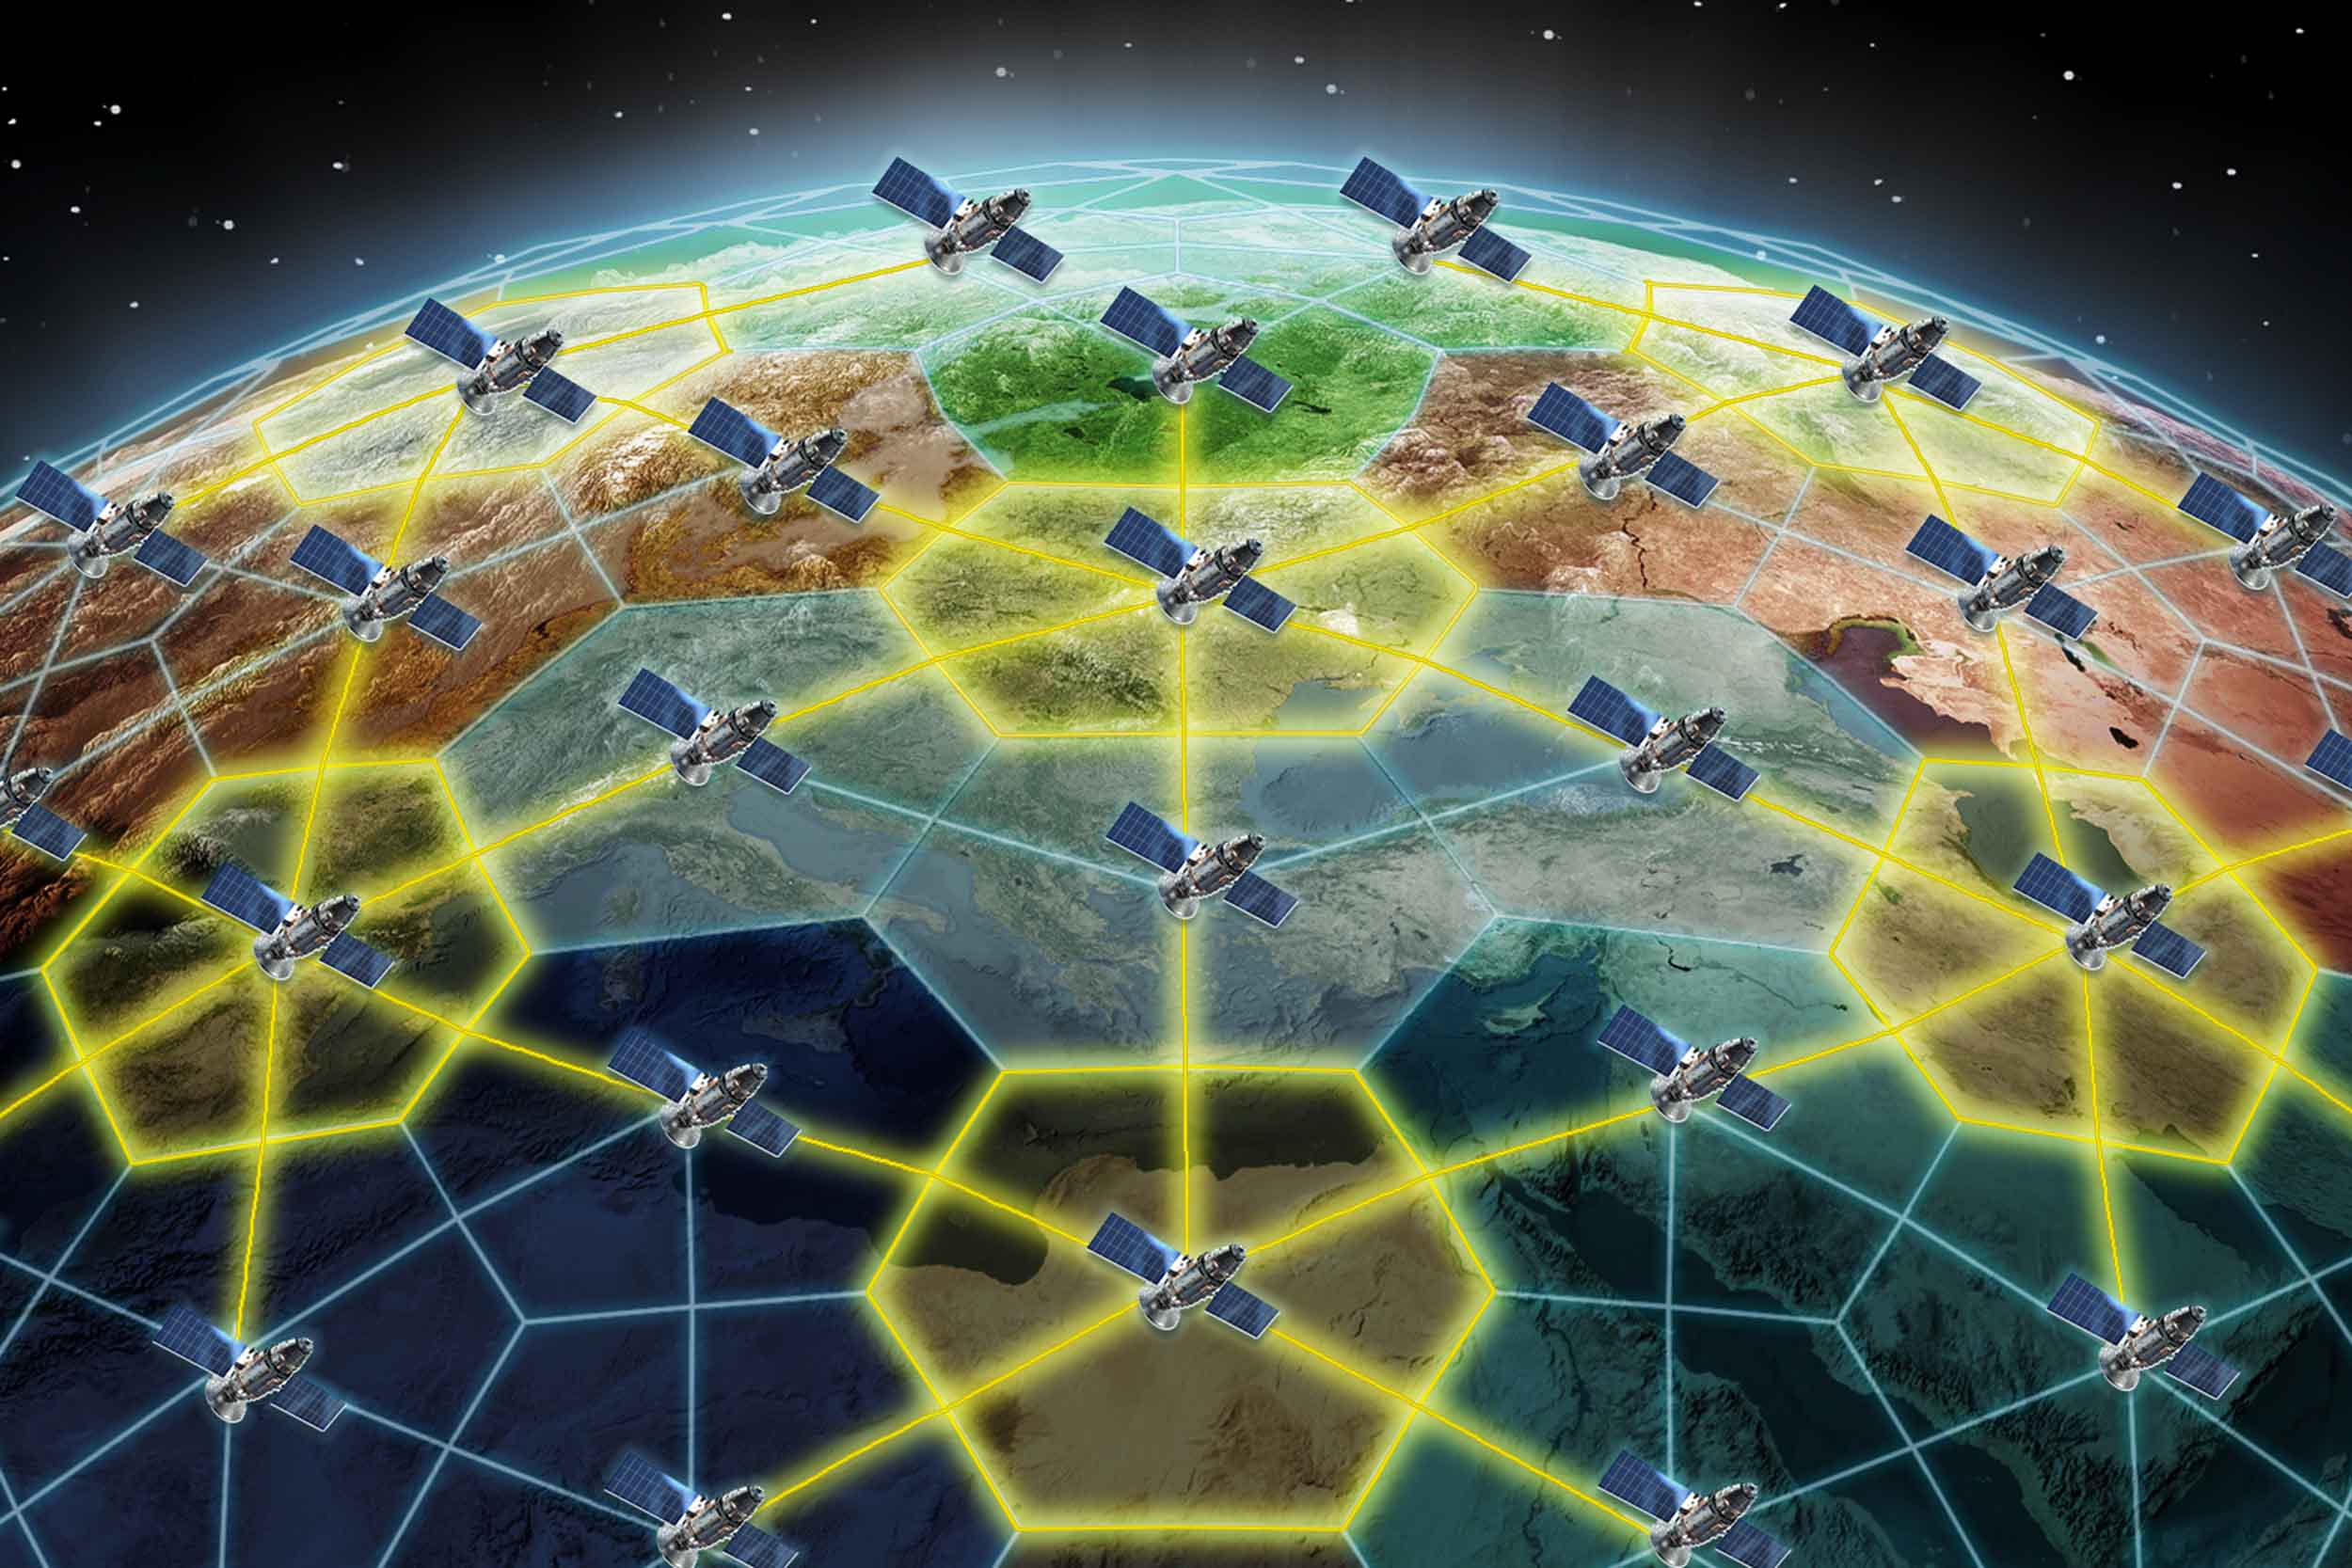 Digital rendering of a grid of interconnected satellites evenly dispersed in the atmosphere above the earth, as if in protection of it